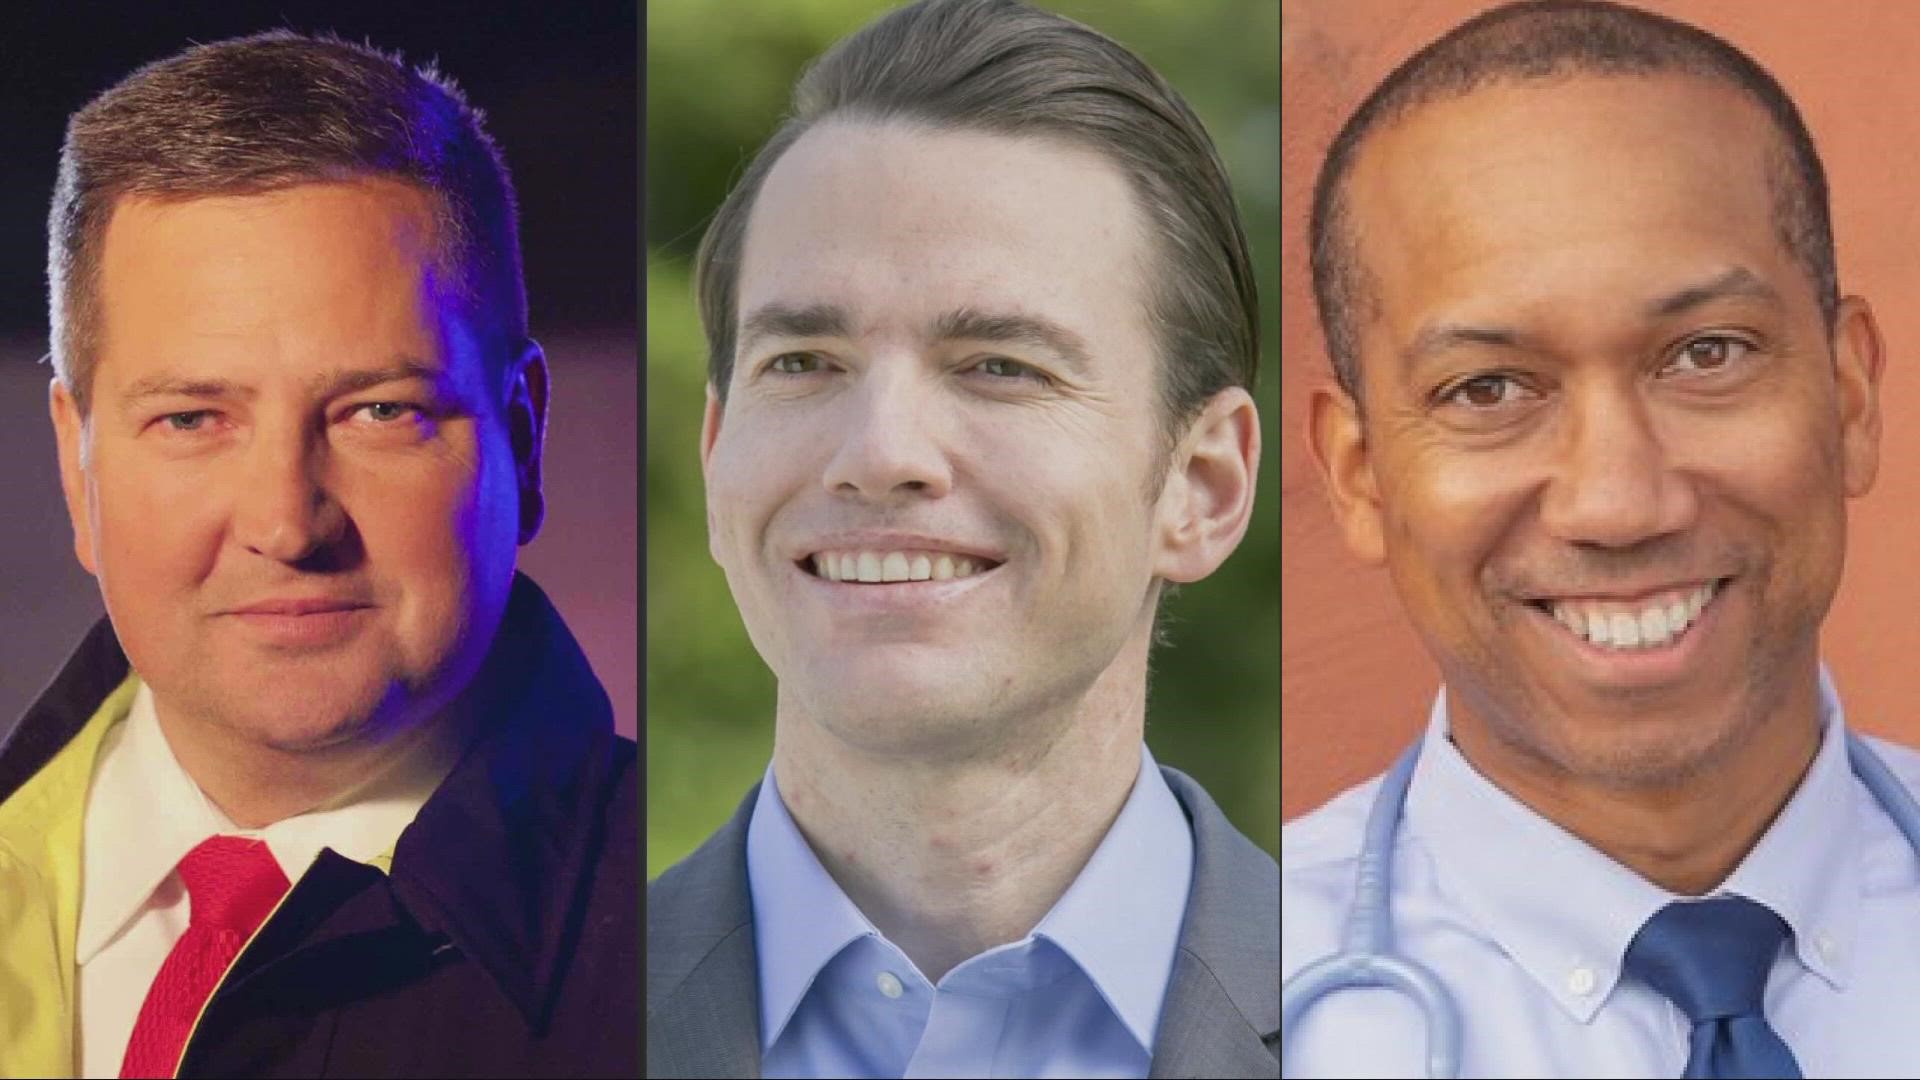 Our Giacomo Luca spoke with the three major candidates for California's senate seat in the U.S. Congress in the 2022 midterm primaries, and elections.